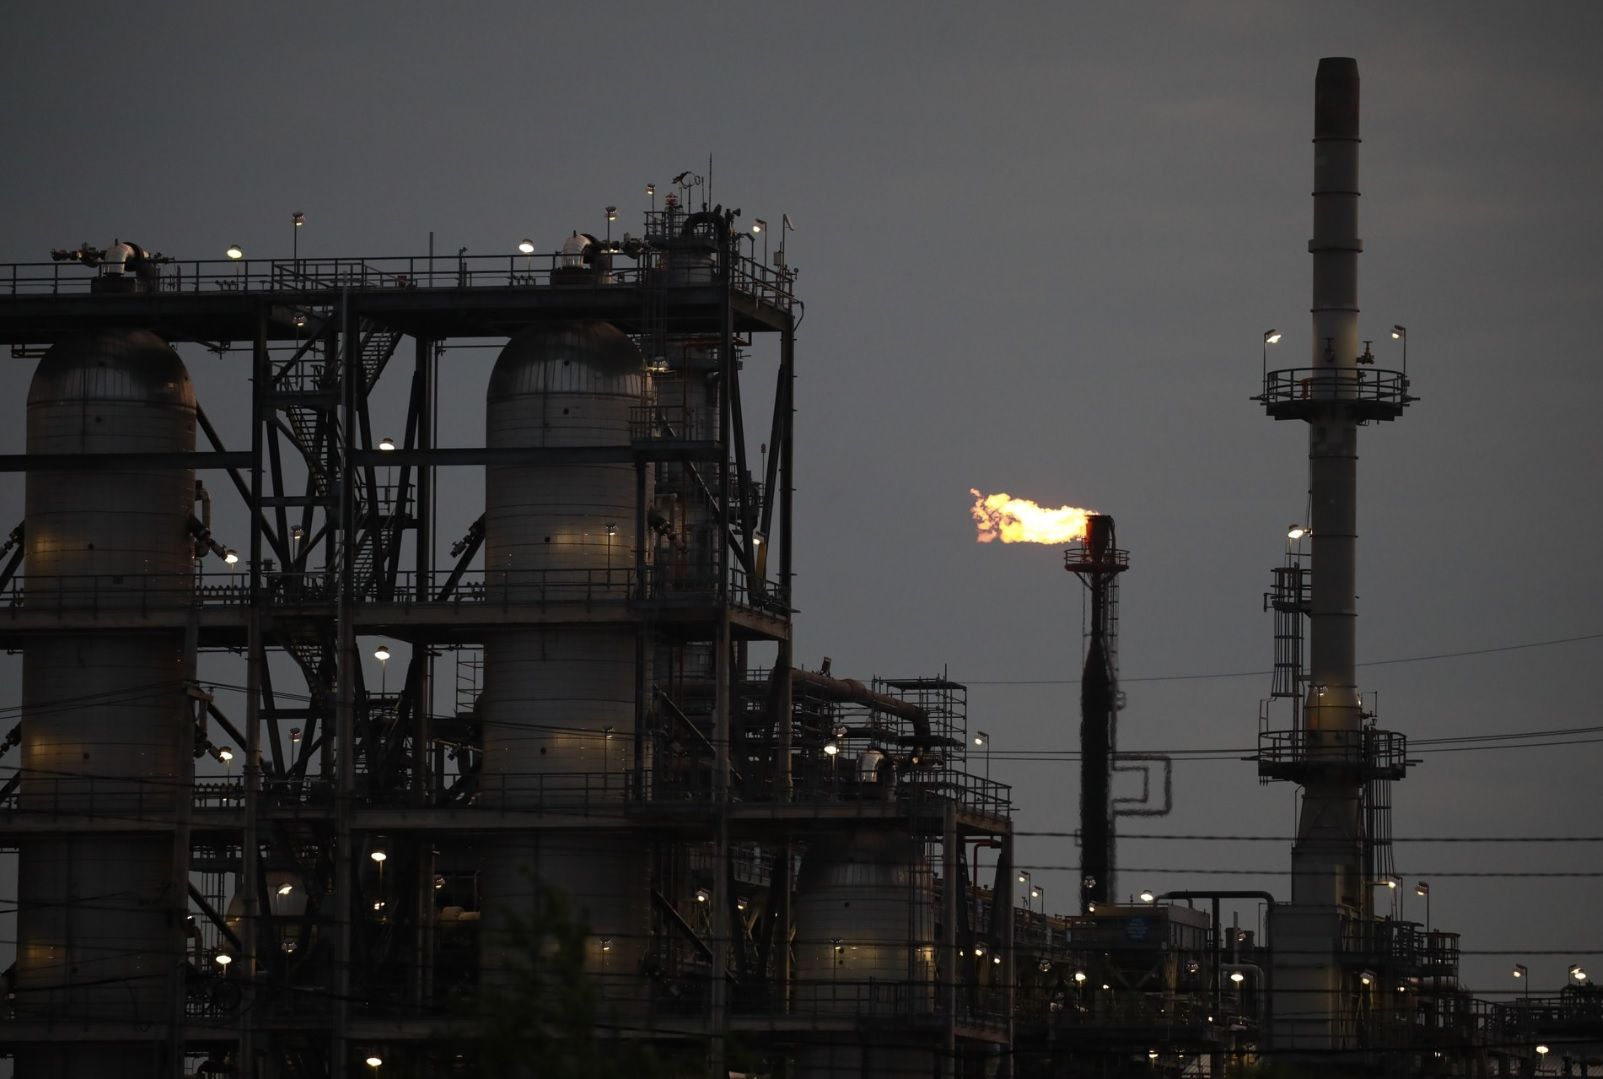 Production resumes at Indiana refinery shutdown after fire